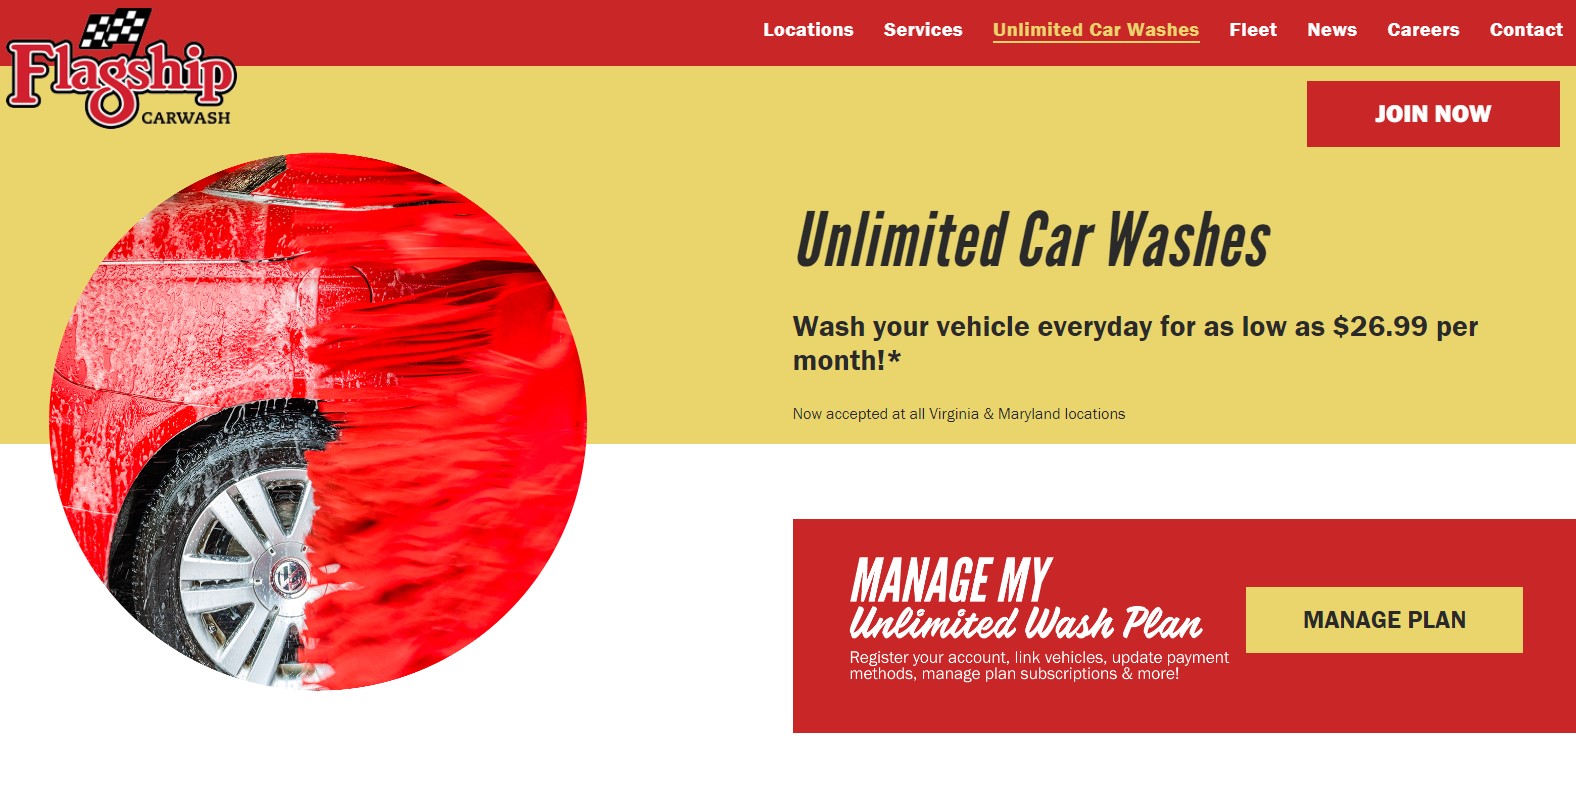 Unlimited Car Washes42